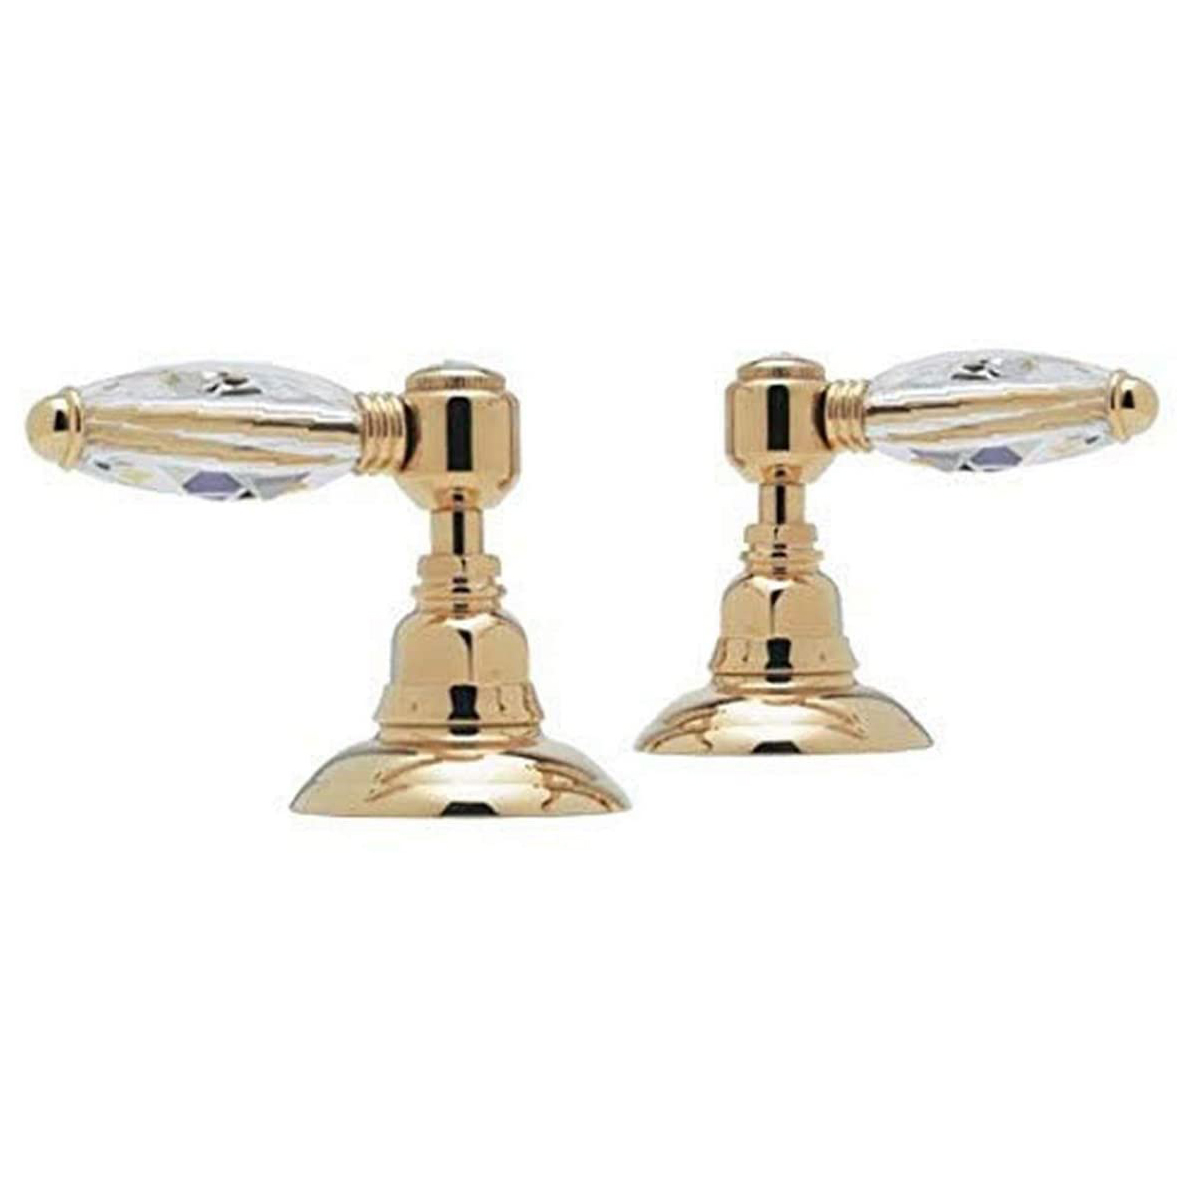 Country Bath Deck Mounted Sidevalves Hot And Cold In Italian Brass